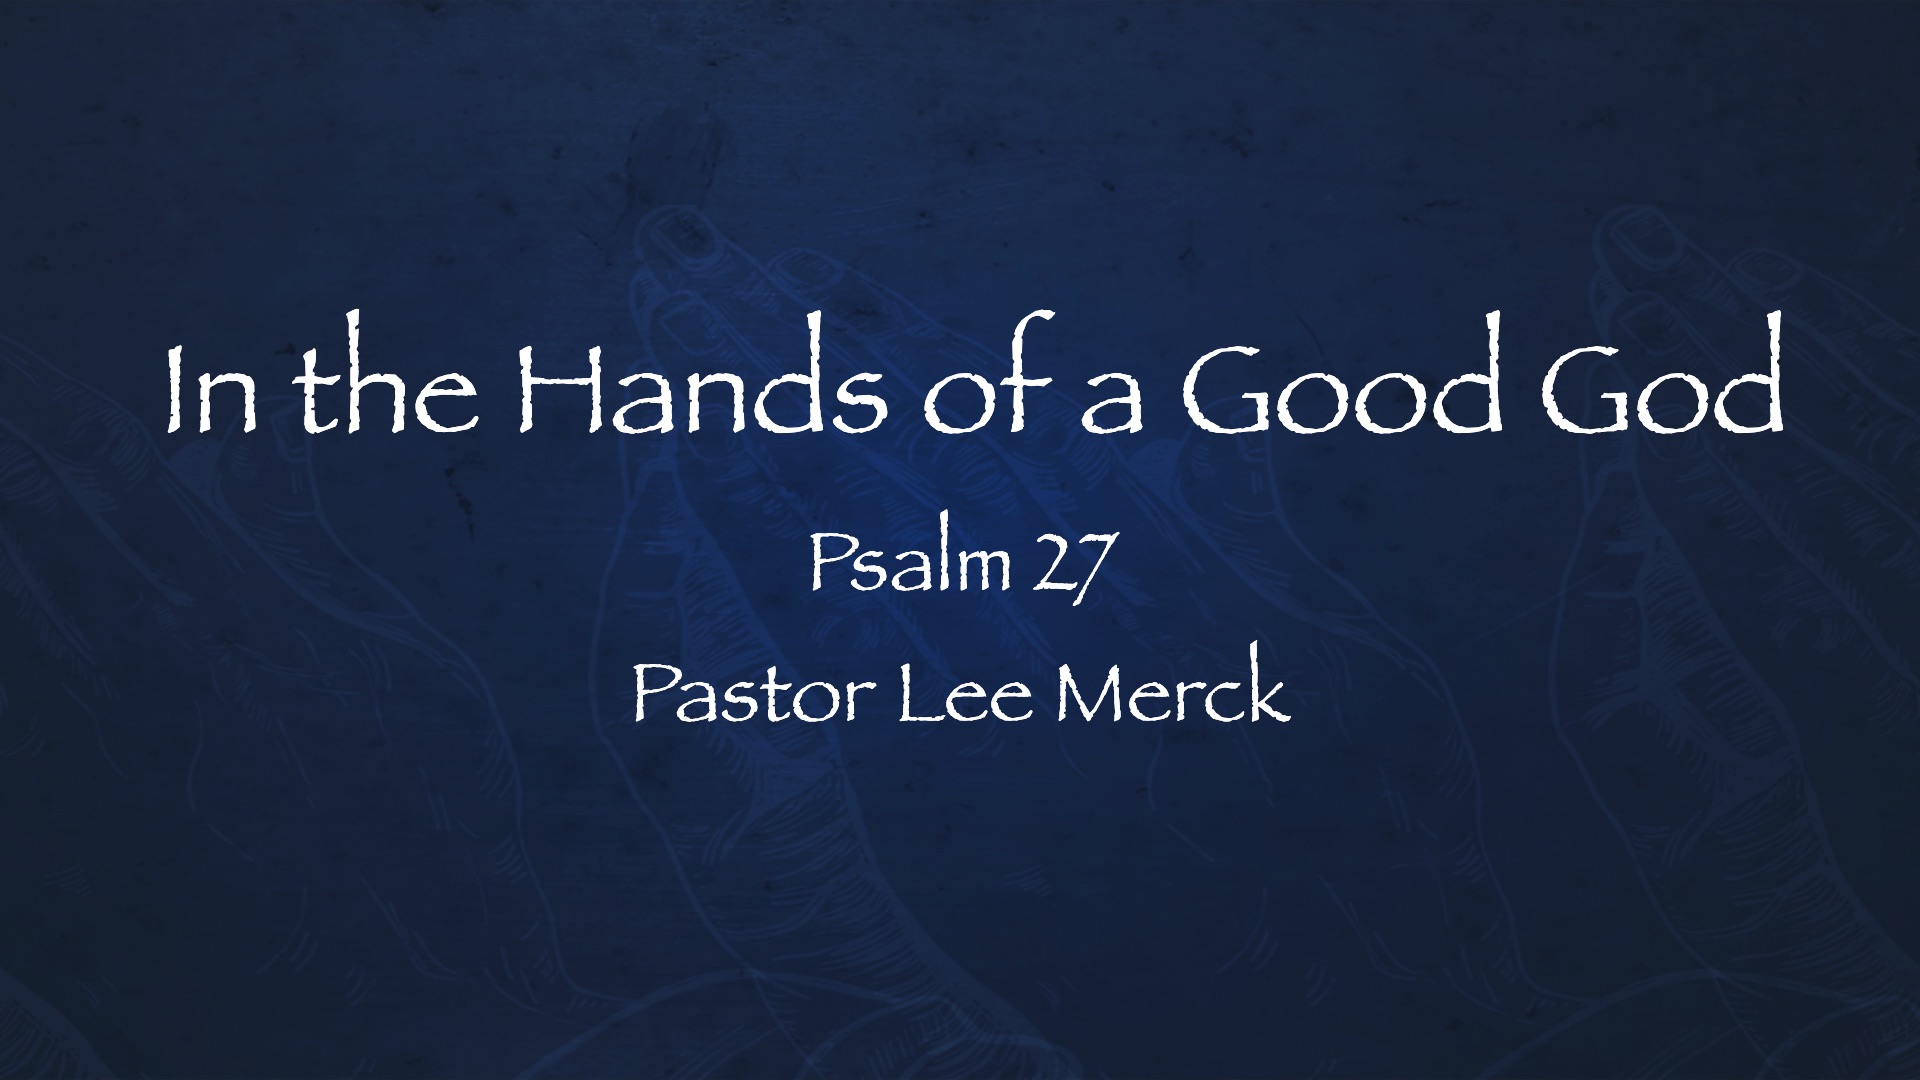 “In The Hands of a Good God”